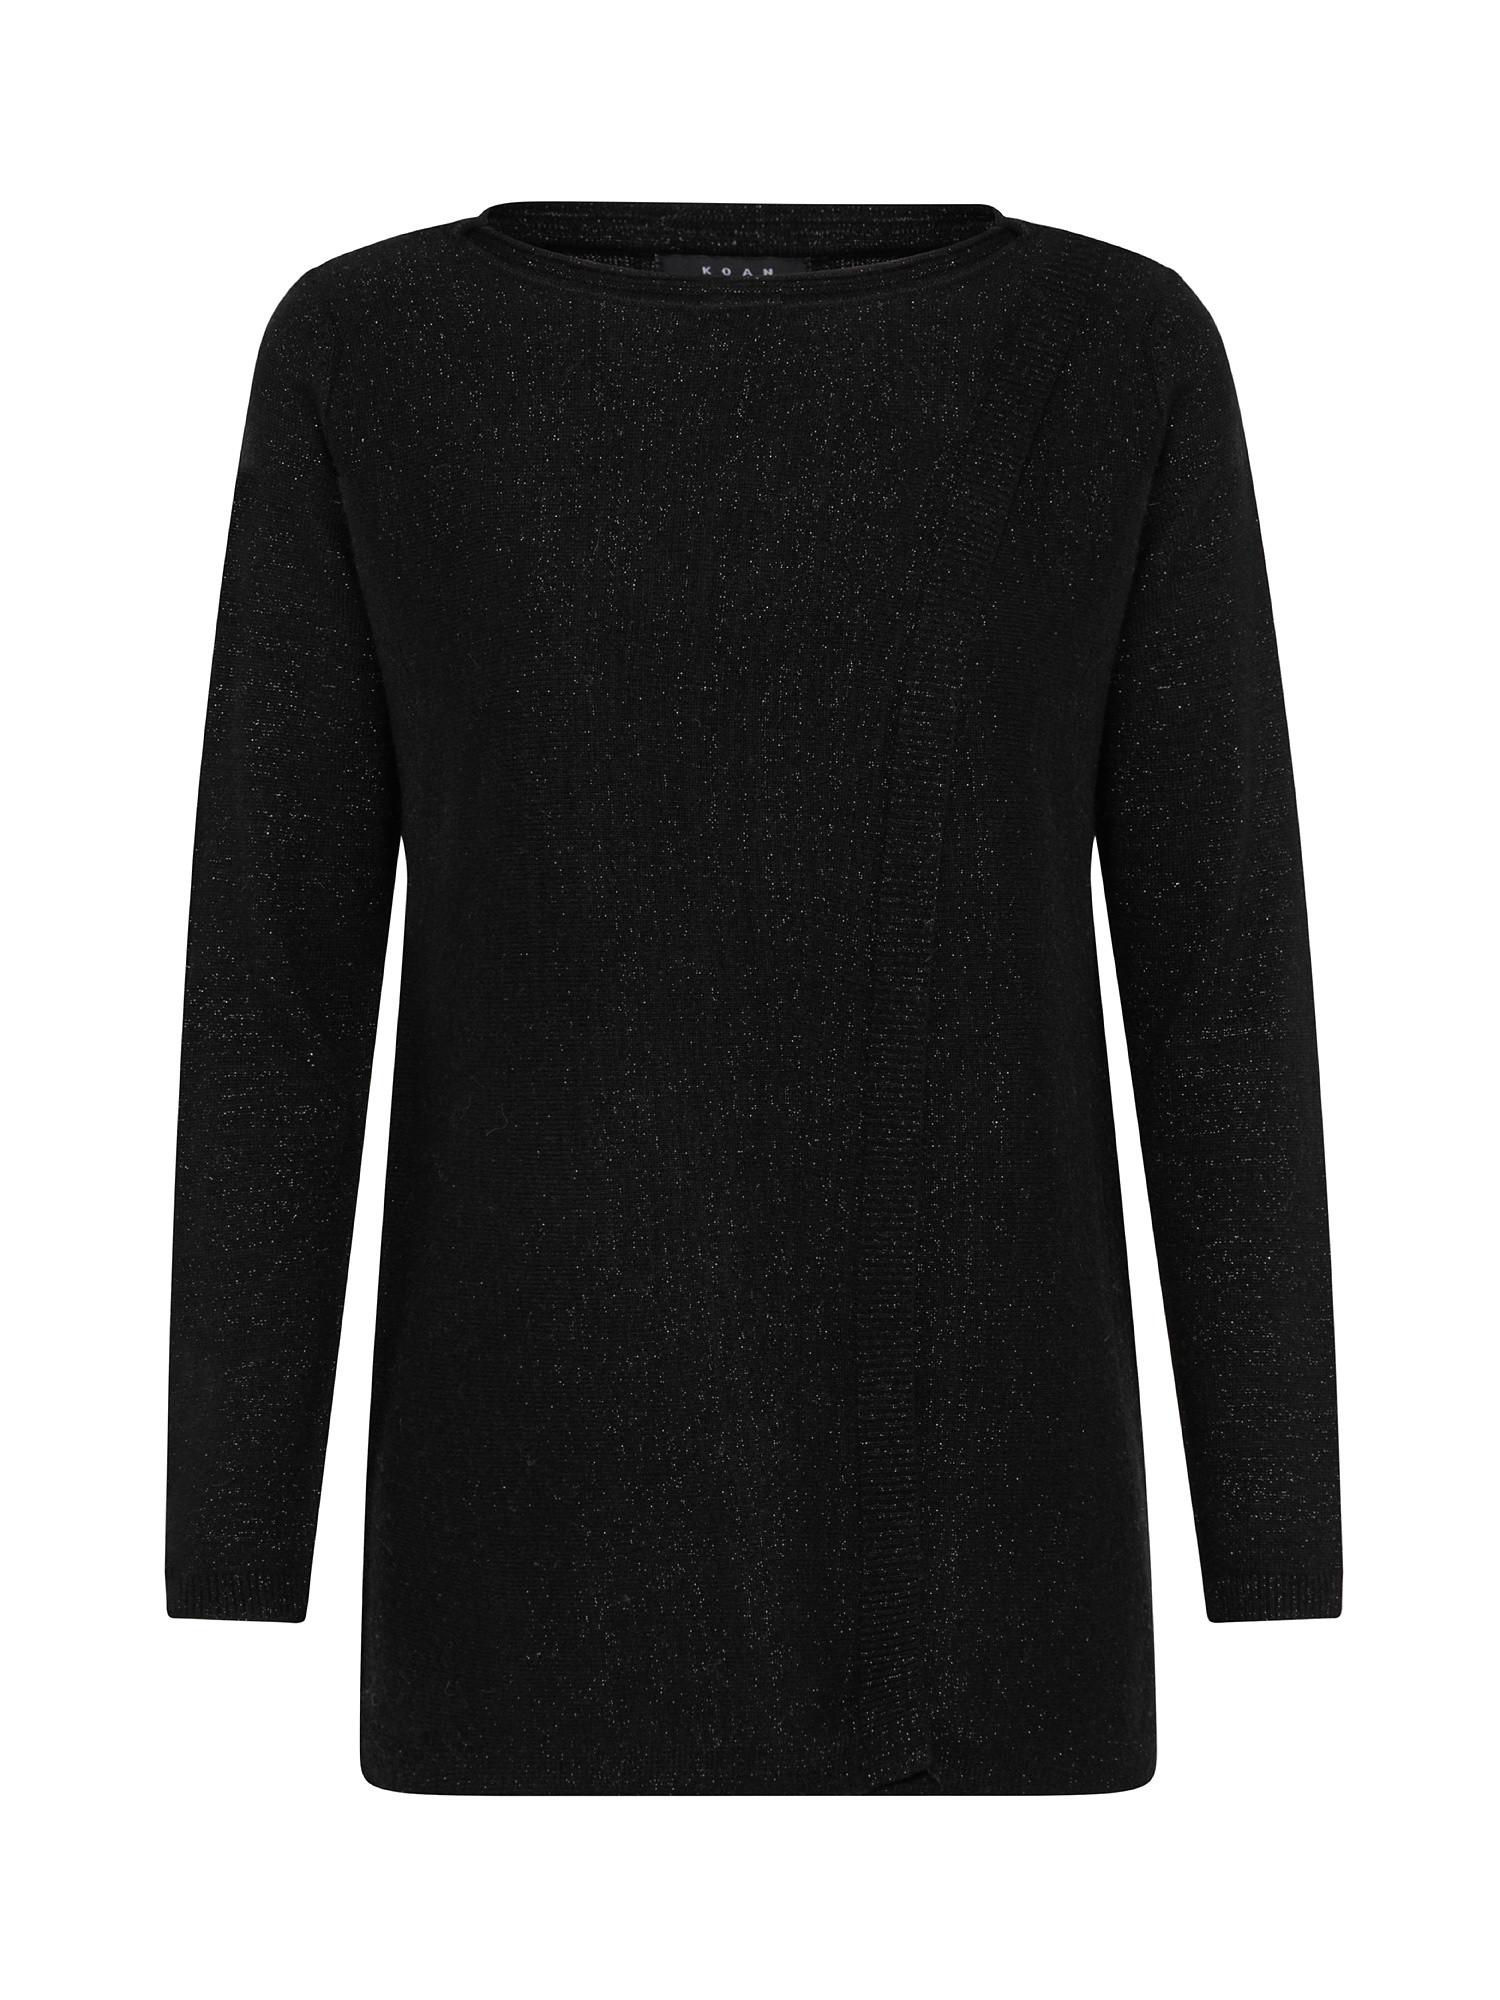 Pullover with pattern, Black, large image number 0